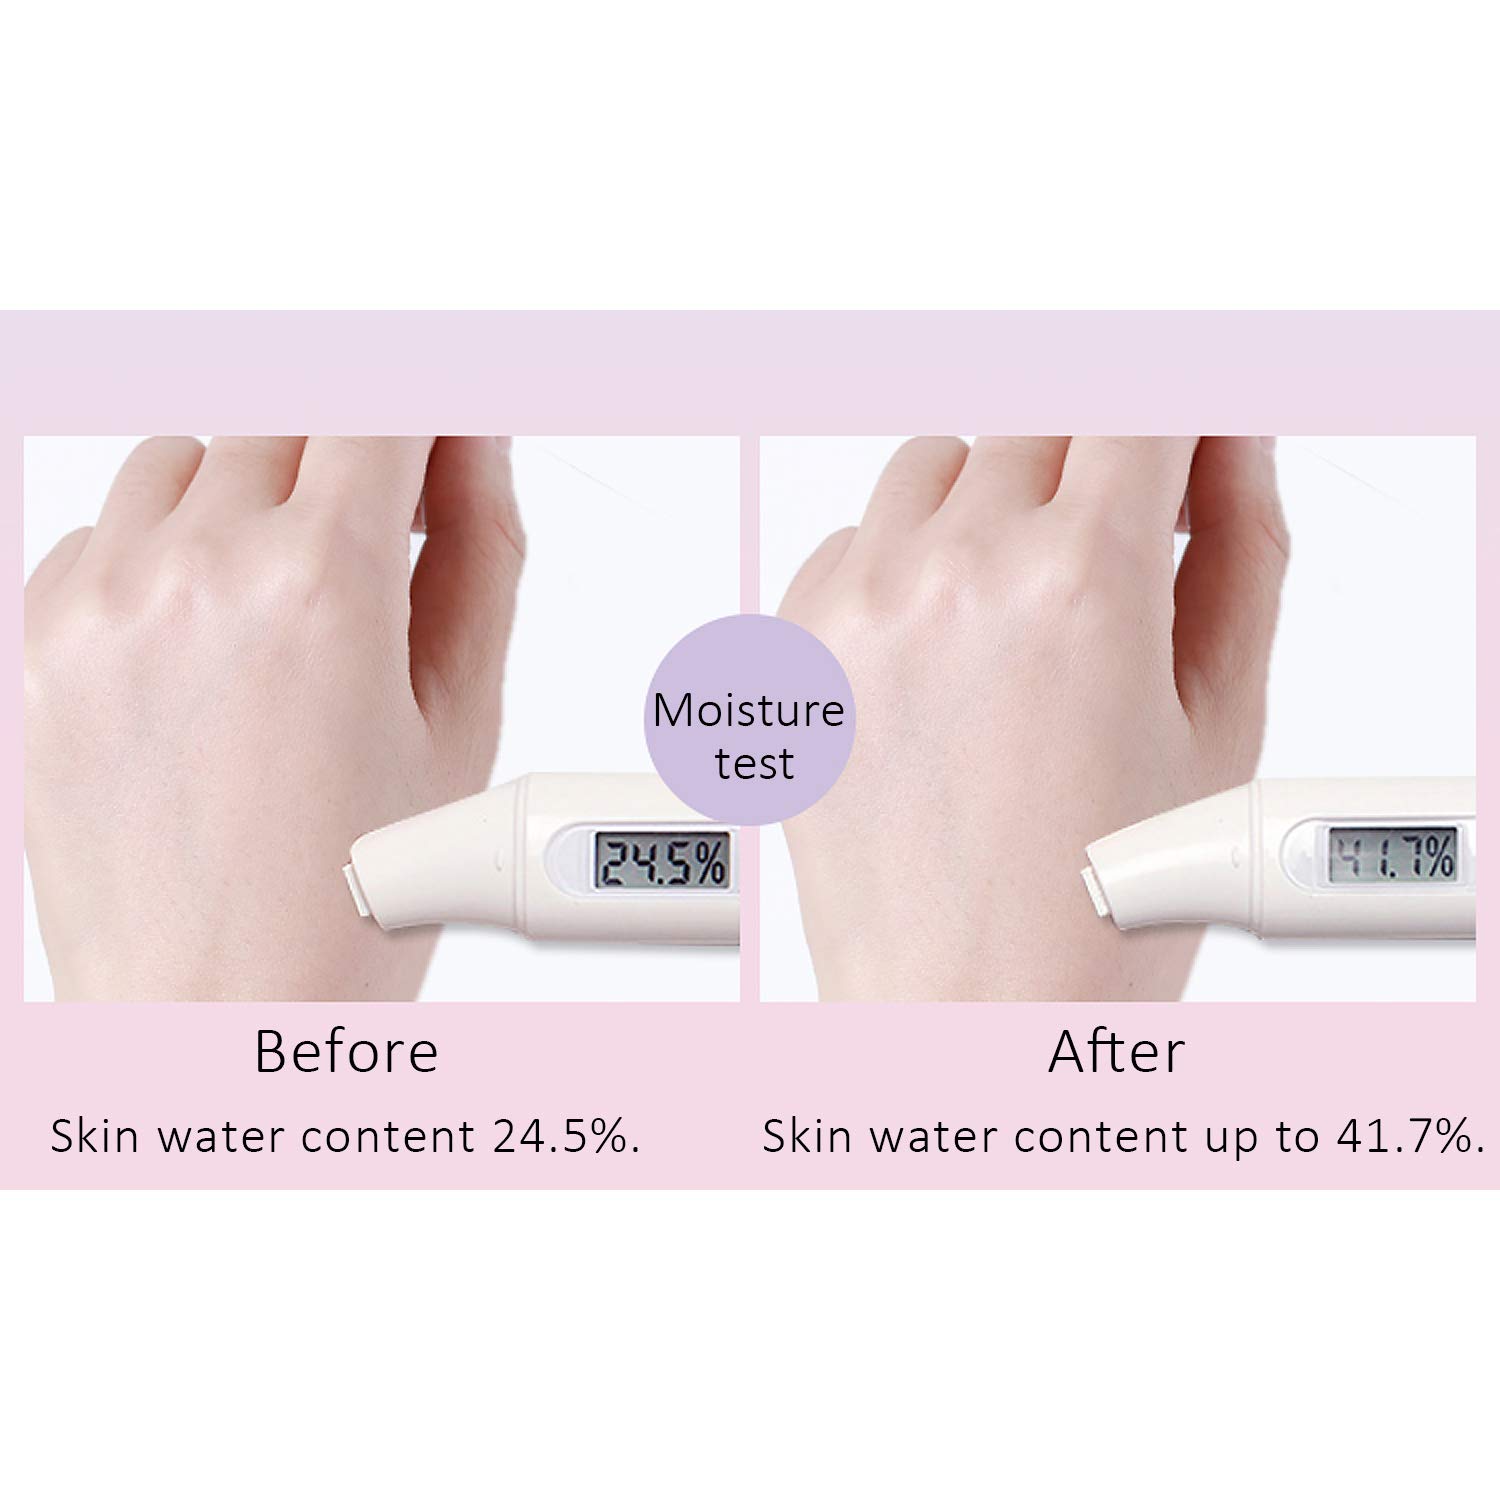  SIAMHOO One Step Face Primer Makeup Tricolor Tinted Moisturizer Skin Tone Correcting and Brightening Primer for Glowing and Flawless Makeup, 35ml - 2pcs